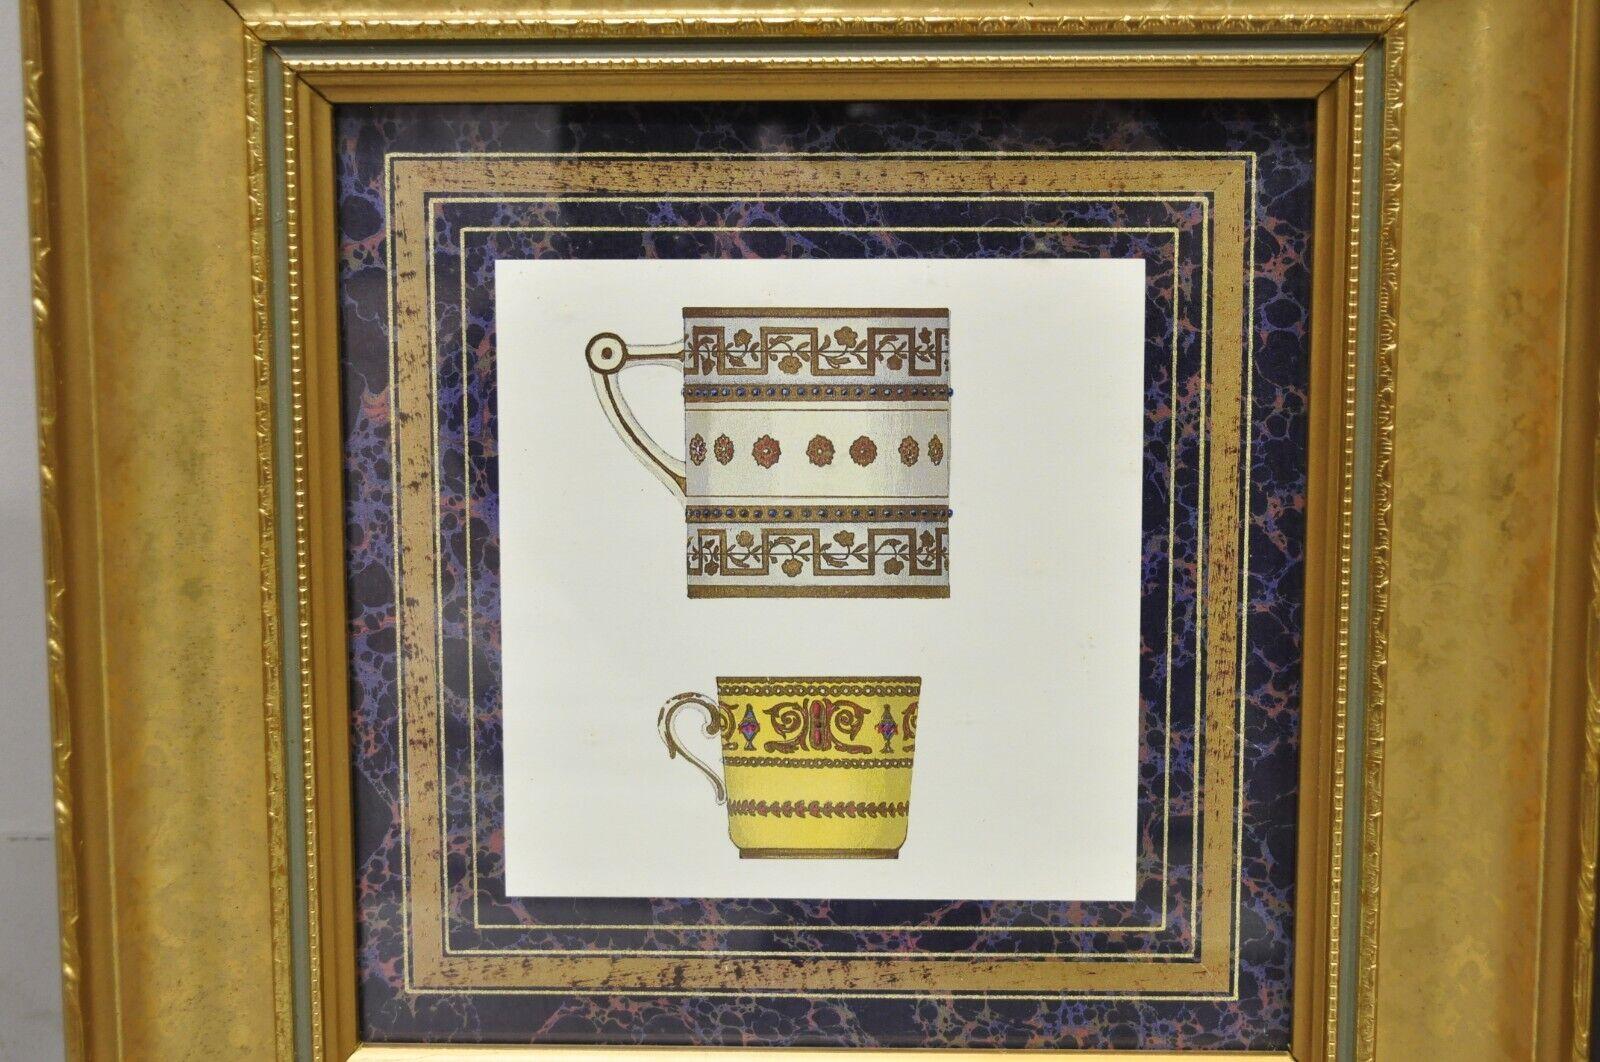 American Classical Artistic Innovations Framed Art Print Canada Plate and Cups, 3 Pc Set For Sale